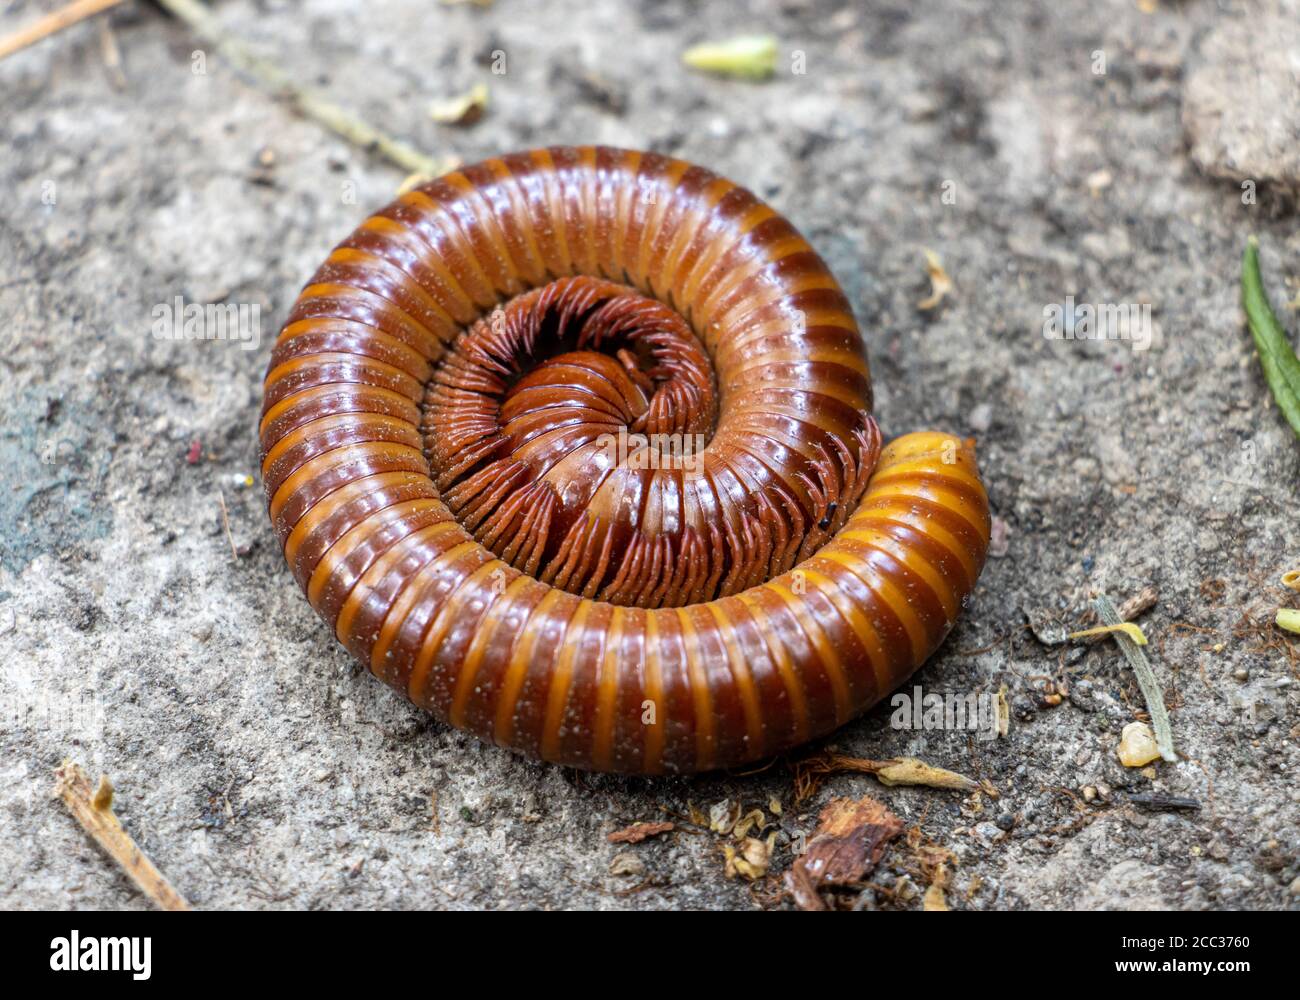 Closeup of red millipede curled to round. A orange Giant Millipede on ground, close up. Stock Photo